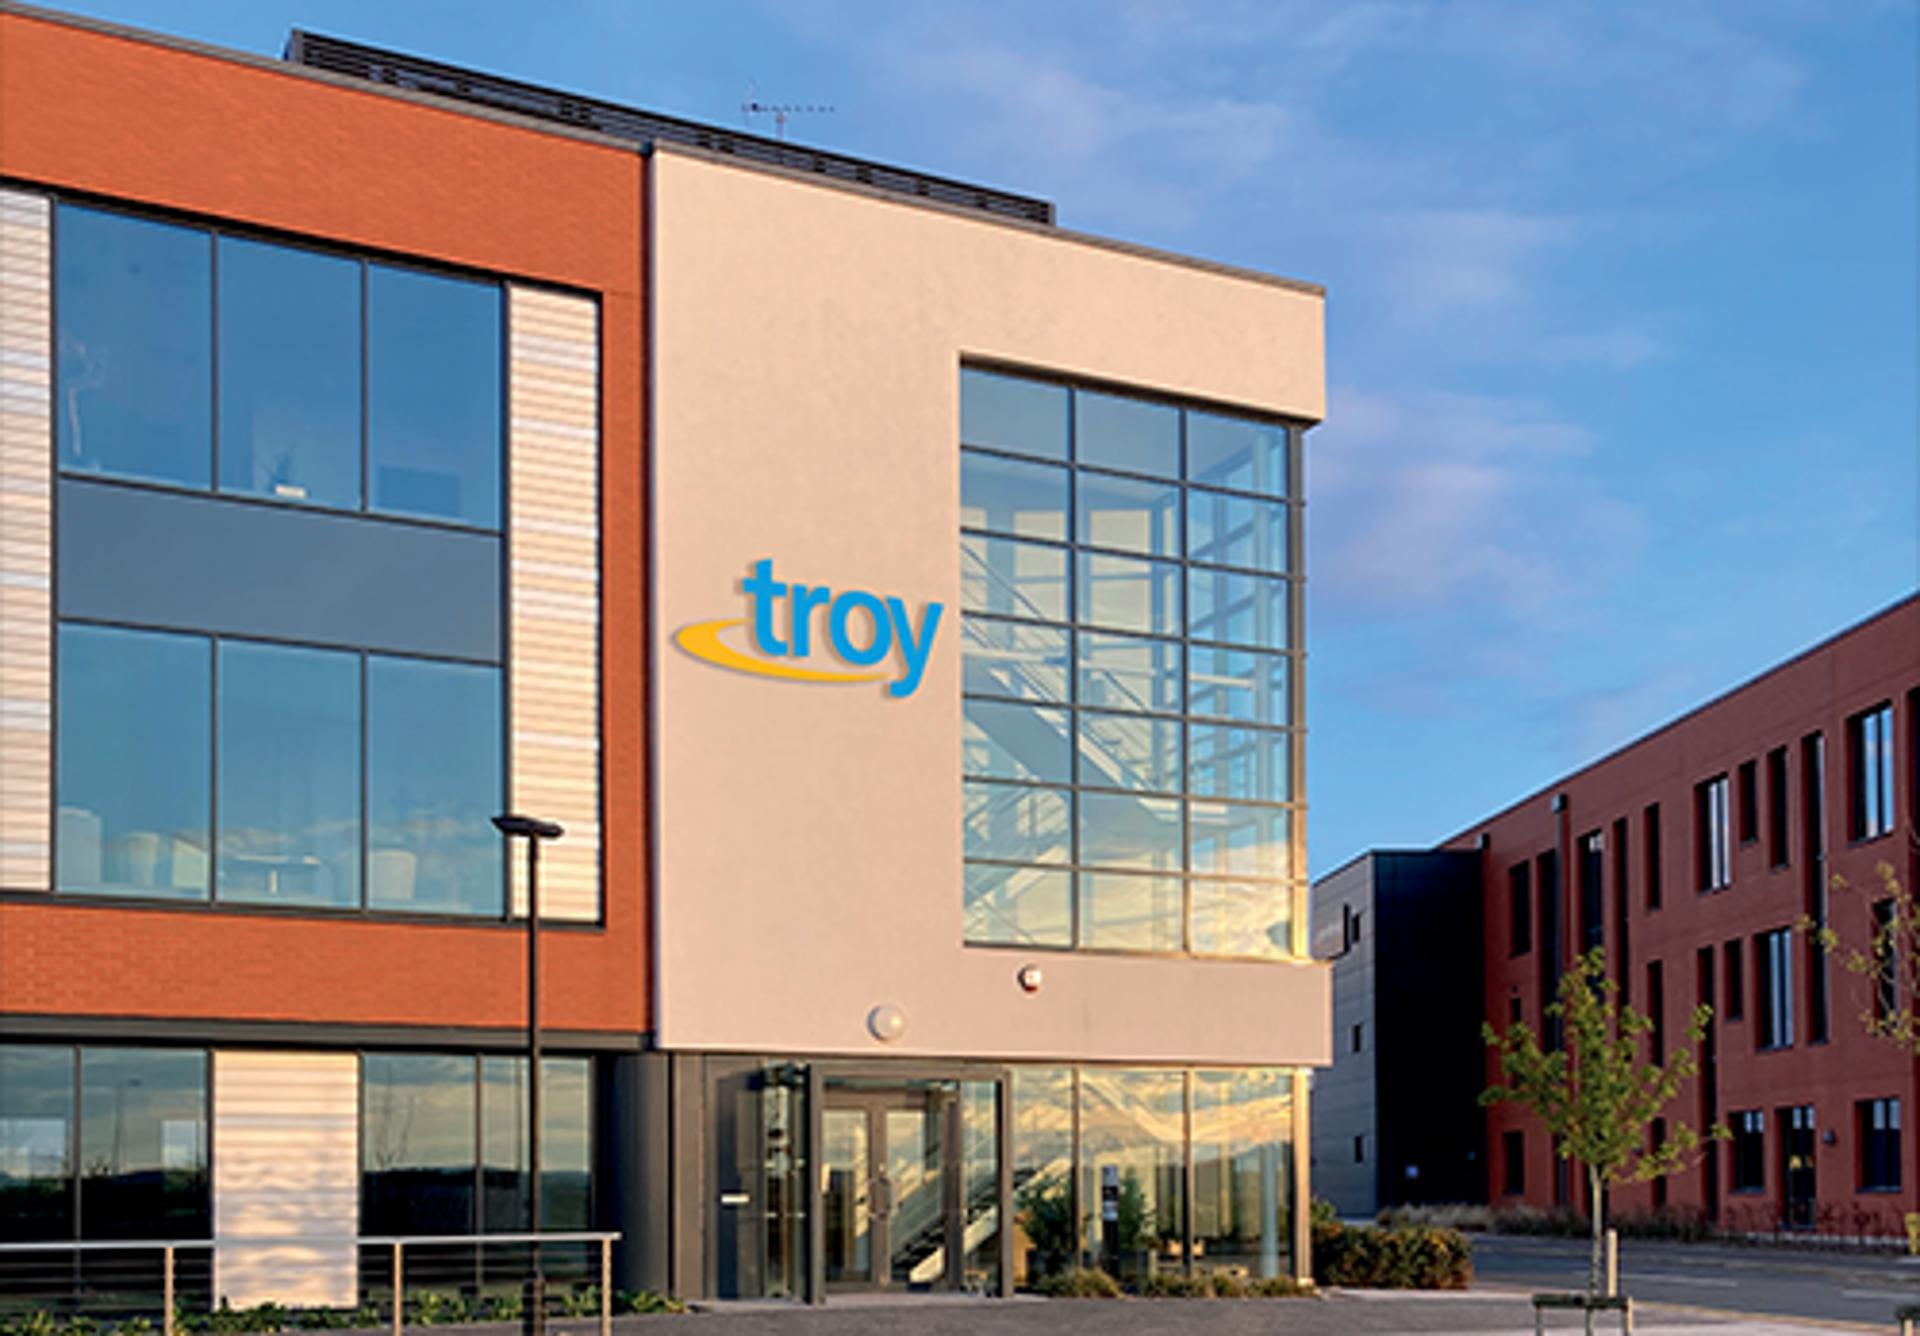 Engineering supplies firm Troy completes latest acquisition